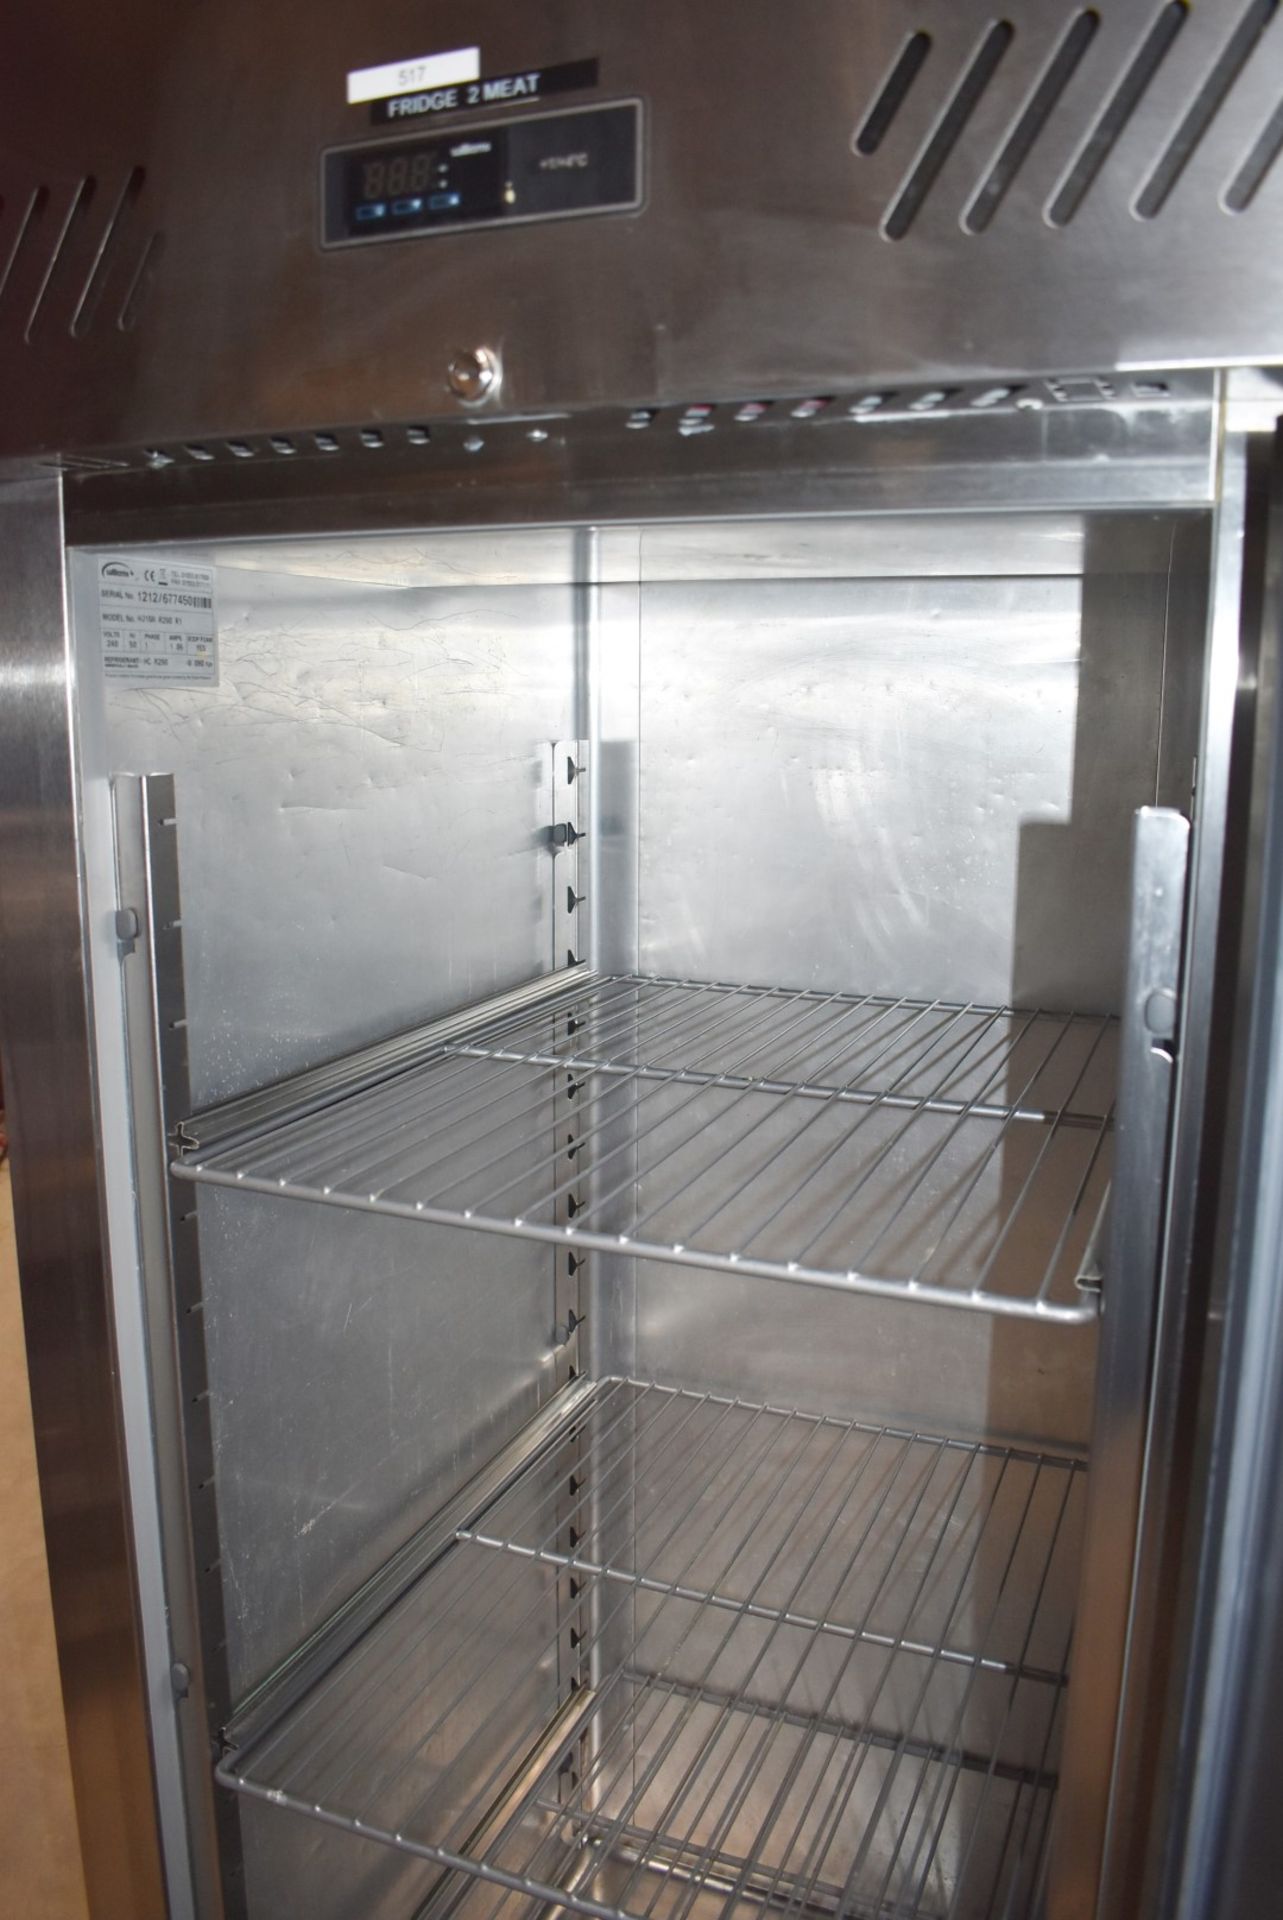 1 x Williams Upright Single Door Refrigerator With Stainless Steel Exterior - Model HS1SA - Recently - Image 3 of 12